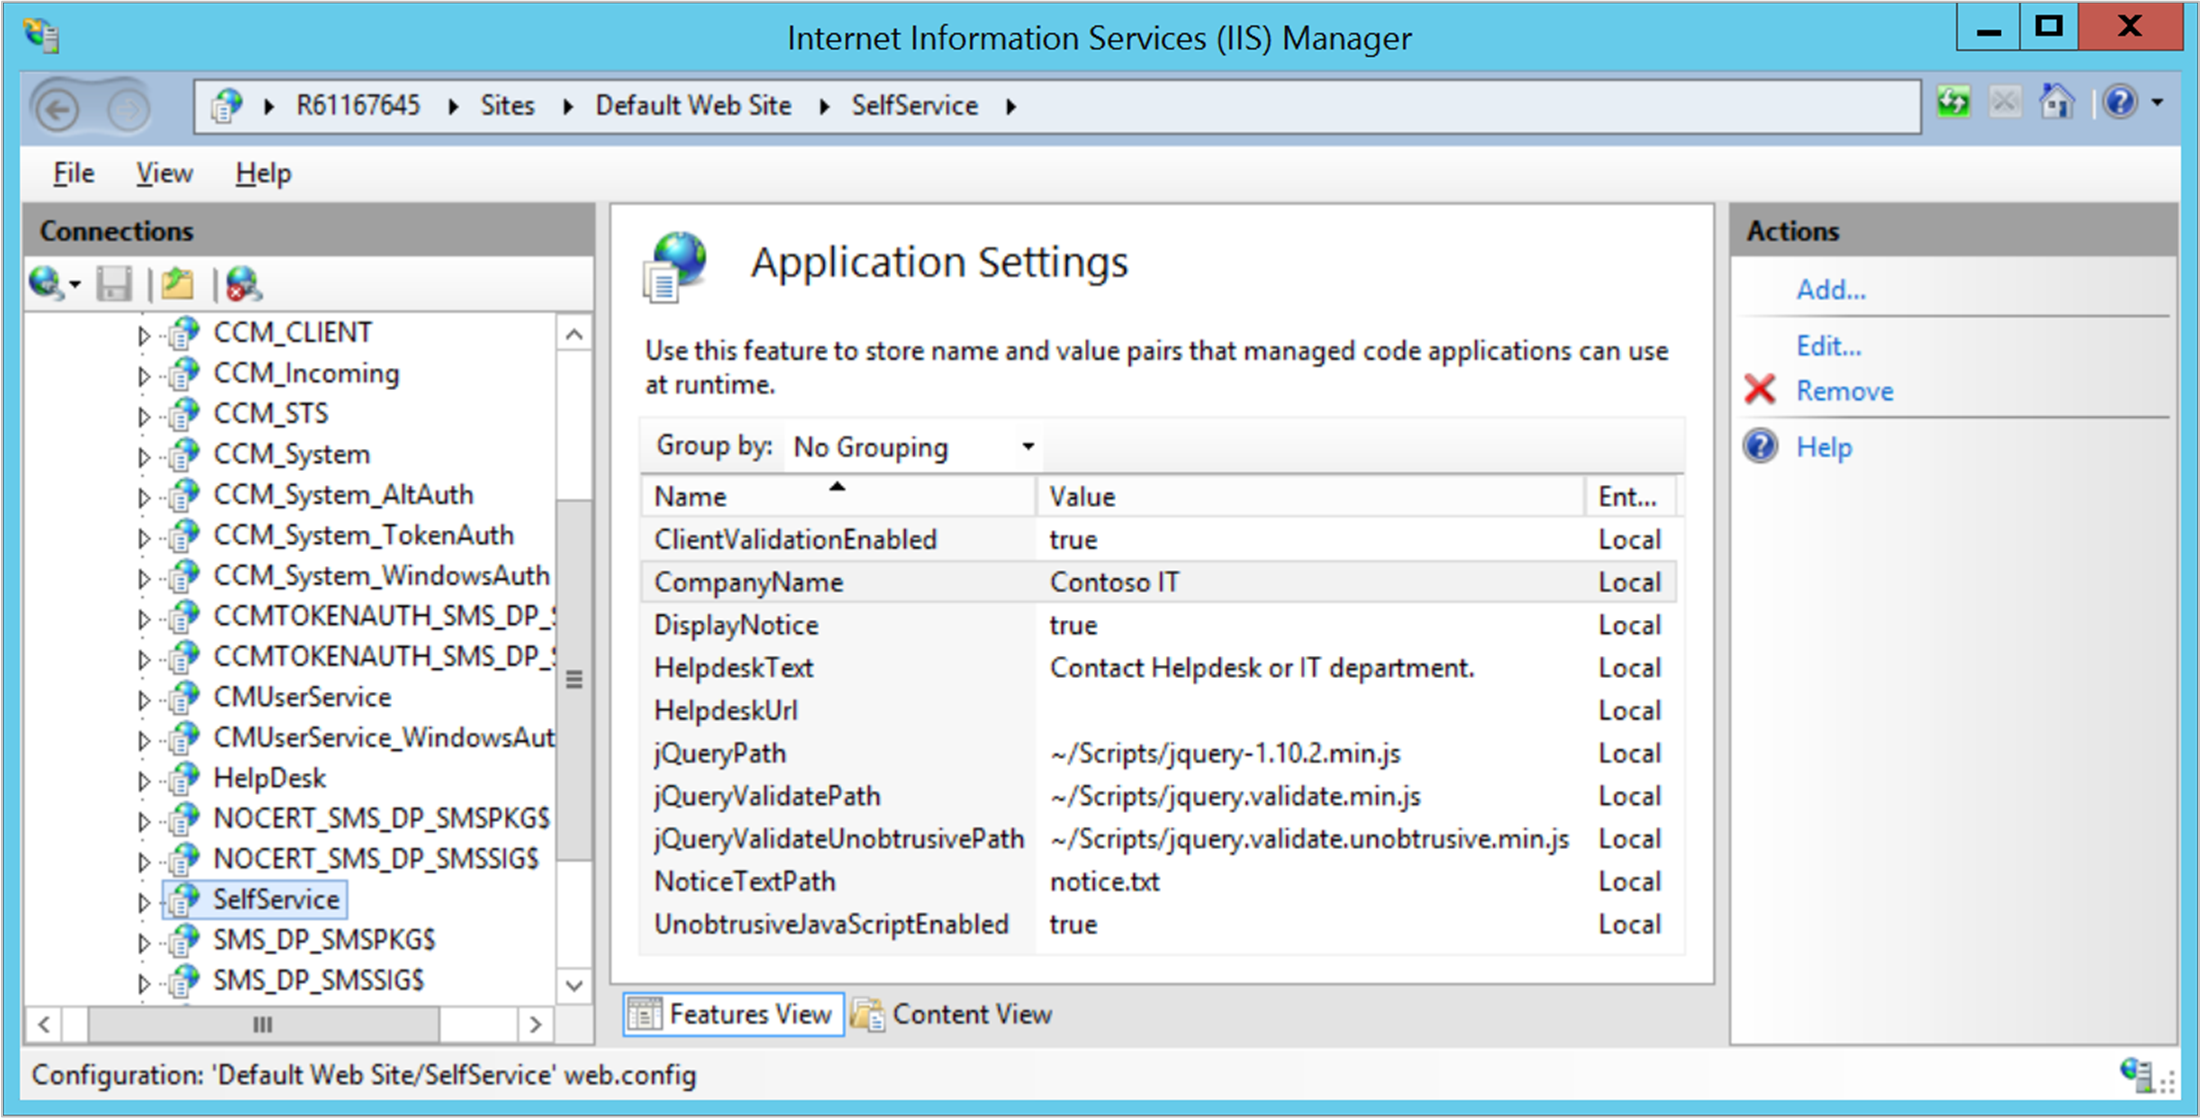 Example screenshot of SelfService application settings in IIS Manager